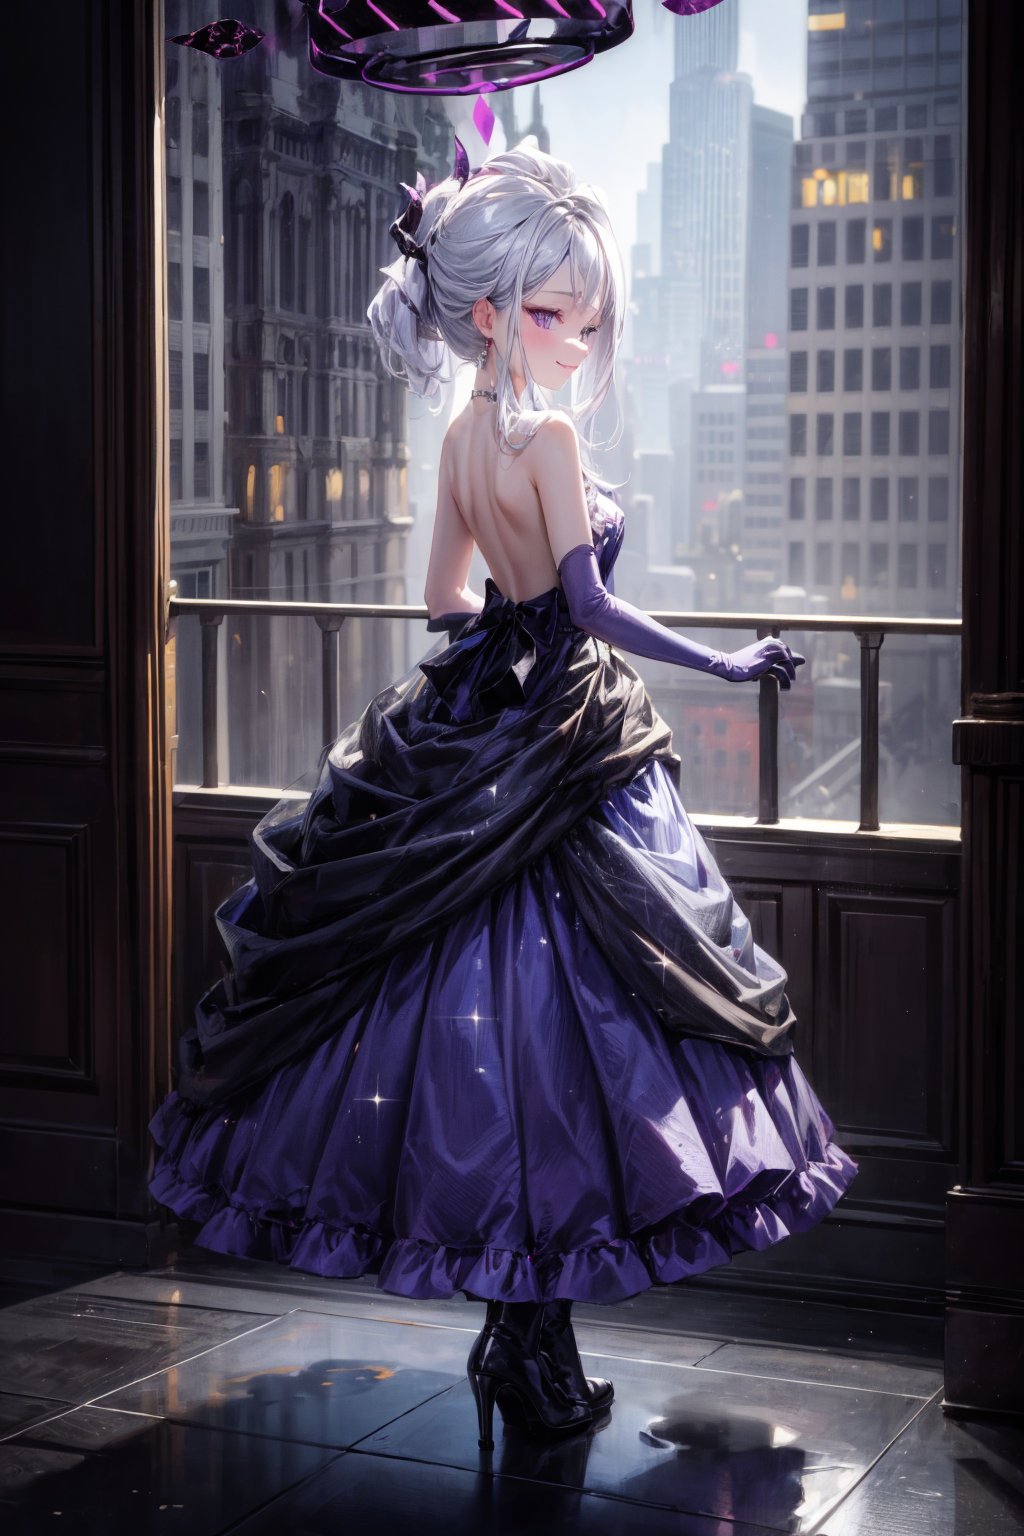 halo, full body, evening dress, with purple gloves, elbow-length gloves, glitter on the dress, purple dress, very short dress, backless, ultra high resolution, 8k, HDr, from behind, face in profile,
glitter on the dress,
smiling,
lifting the skirt with both hands